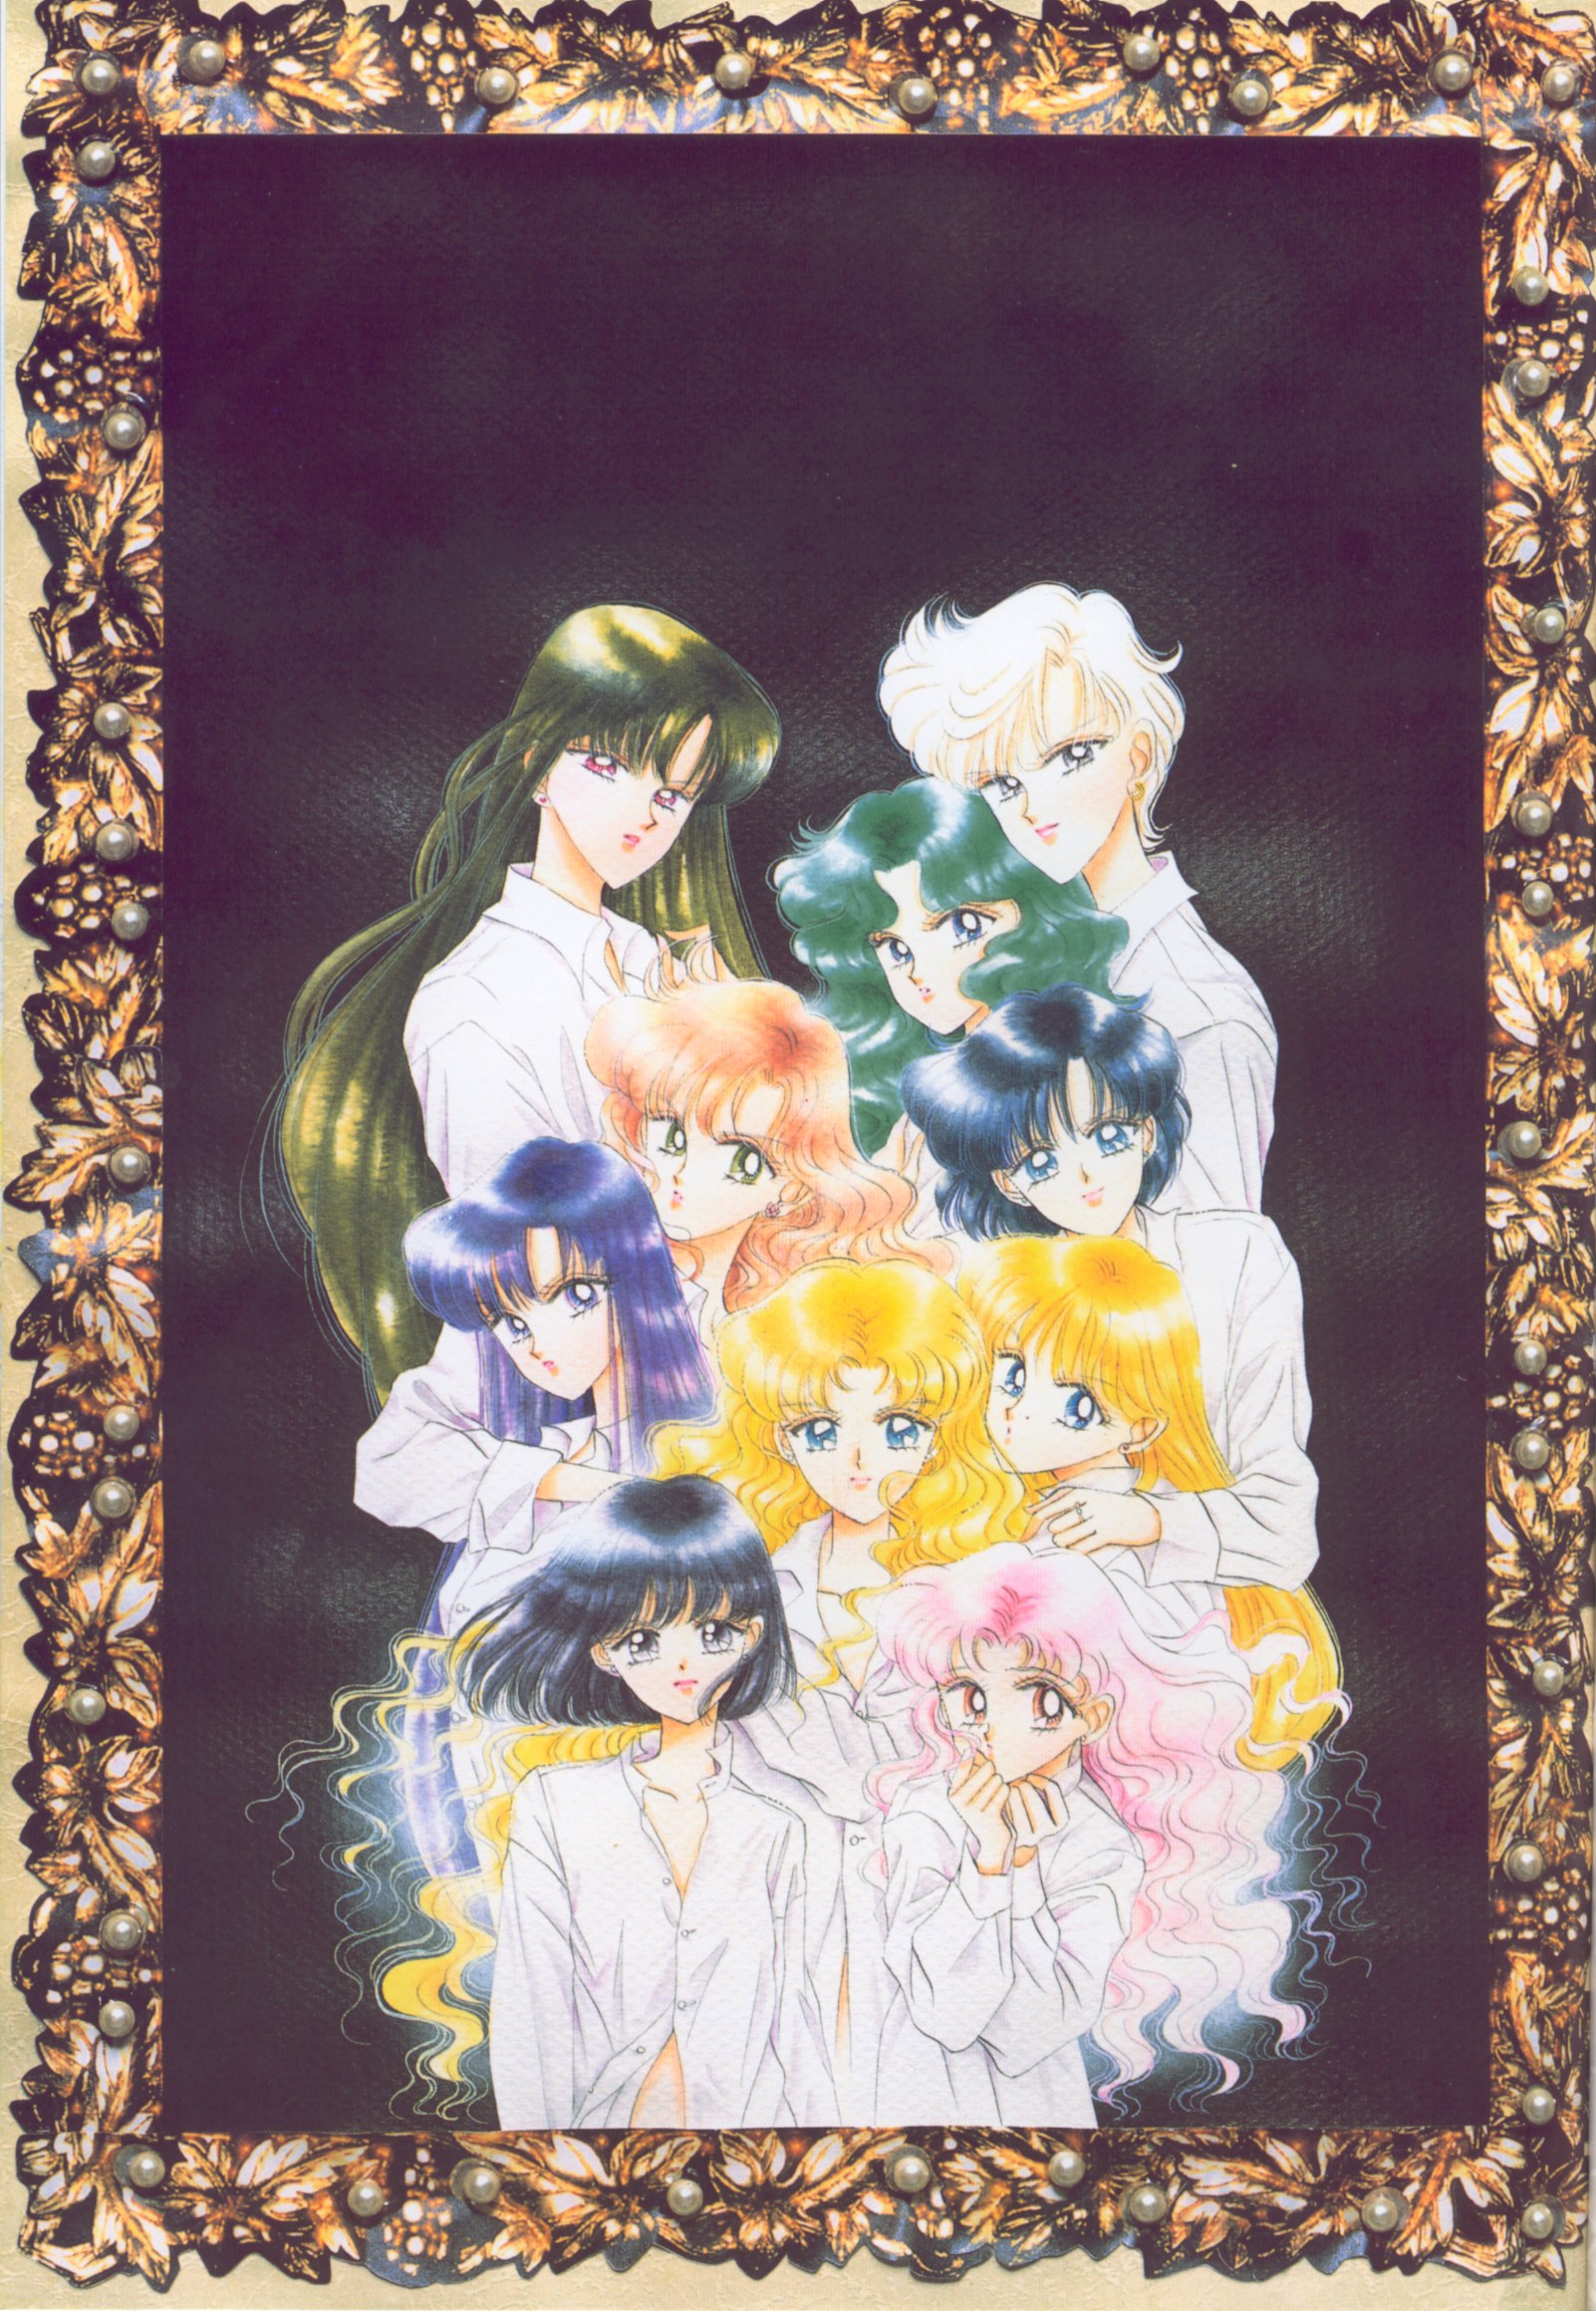 Sailor Moon original collection vol 4 art book From Japan Used